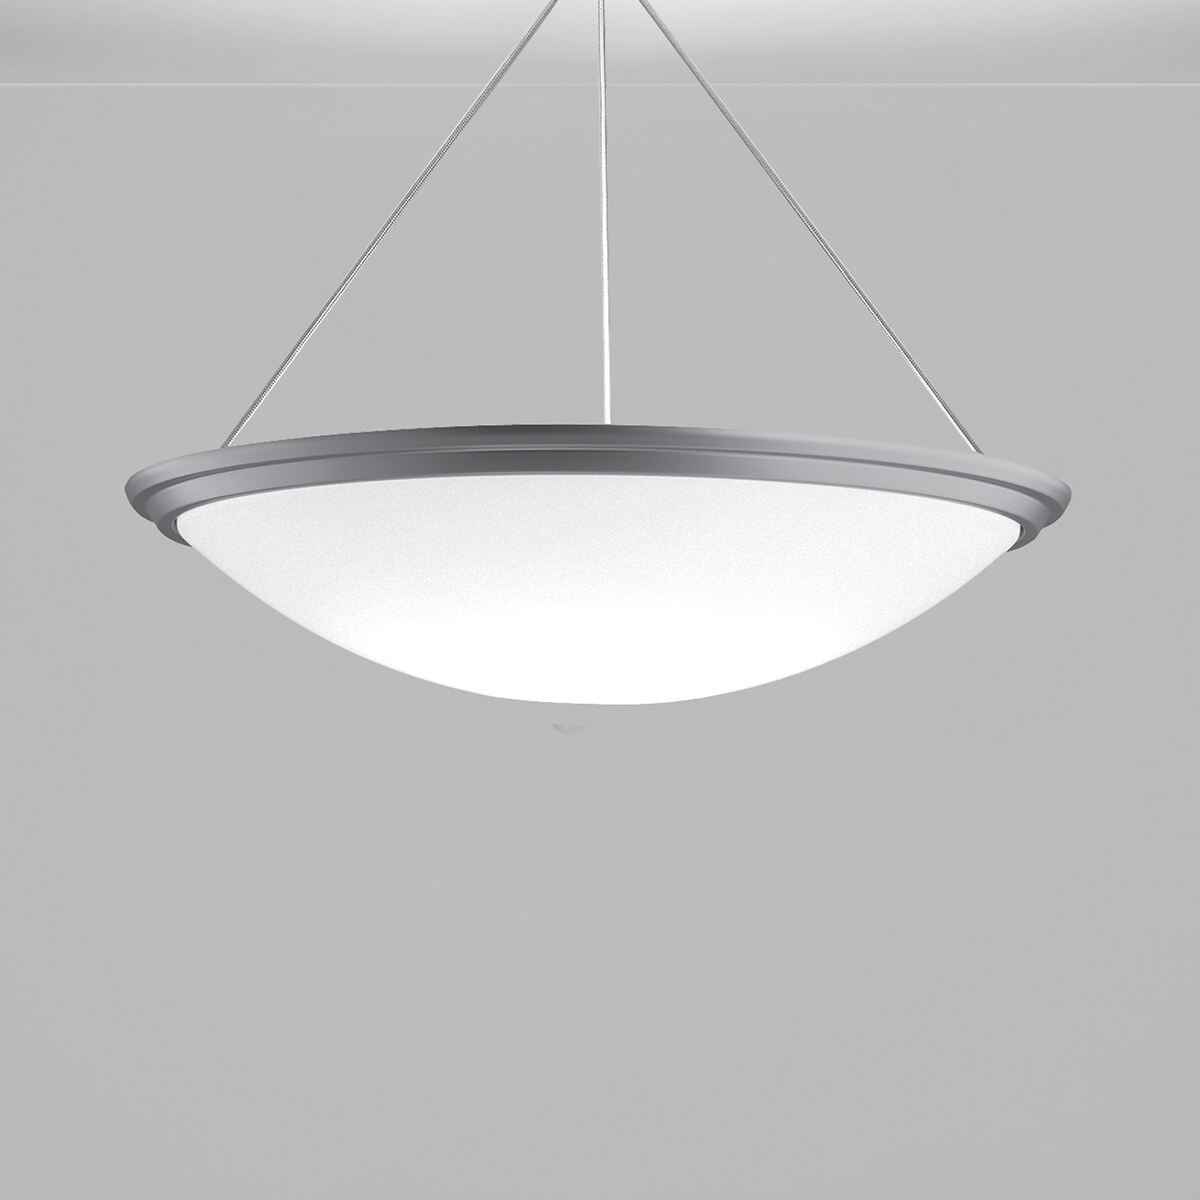 A large bowl pendant suspended with a cable